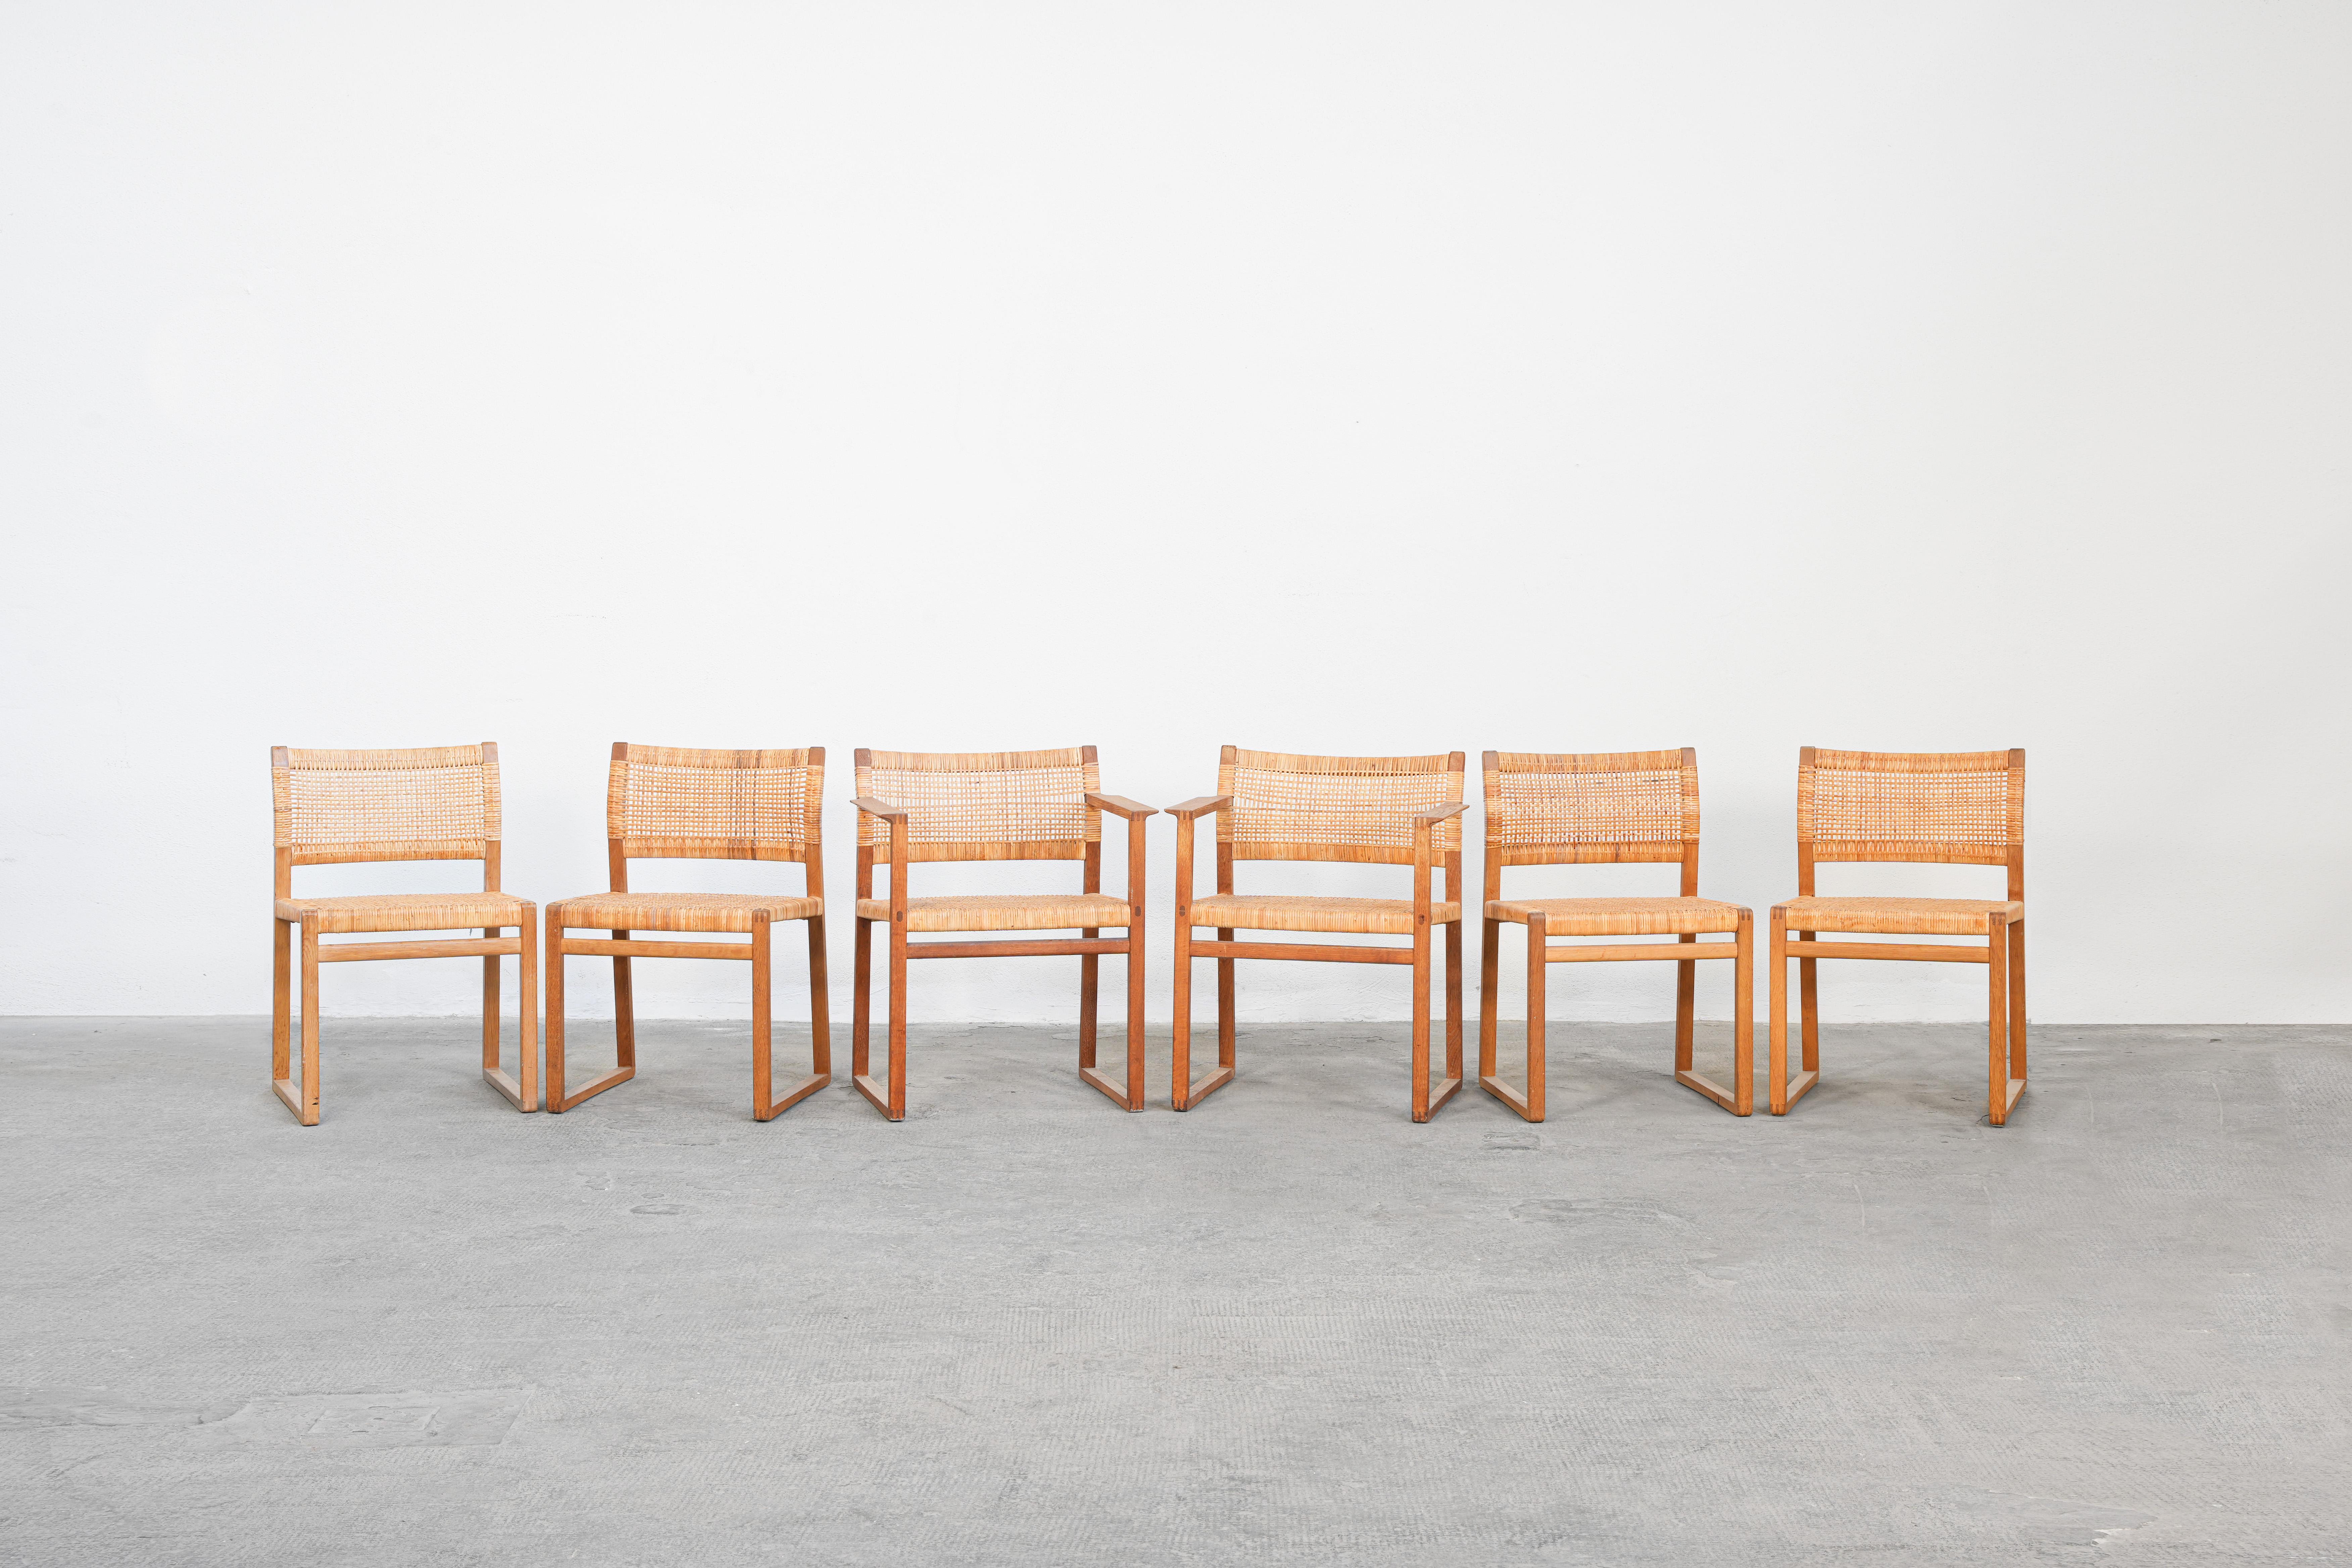 A very beautiful set of 6, 4 side chairs Mod. BM 61 and 2 armchairs Mod. BM62, designed by Børge Mogensen for Fredericia Stolefabrik, Denmark. All chairs are in very good condition with just little traces of usage. The frame is made out of oak and